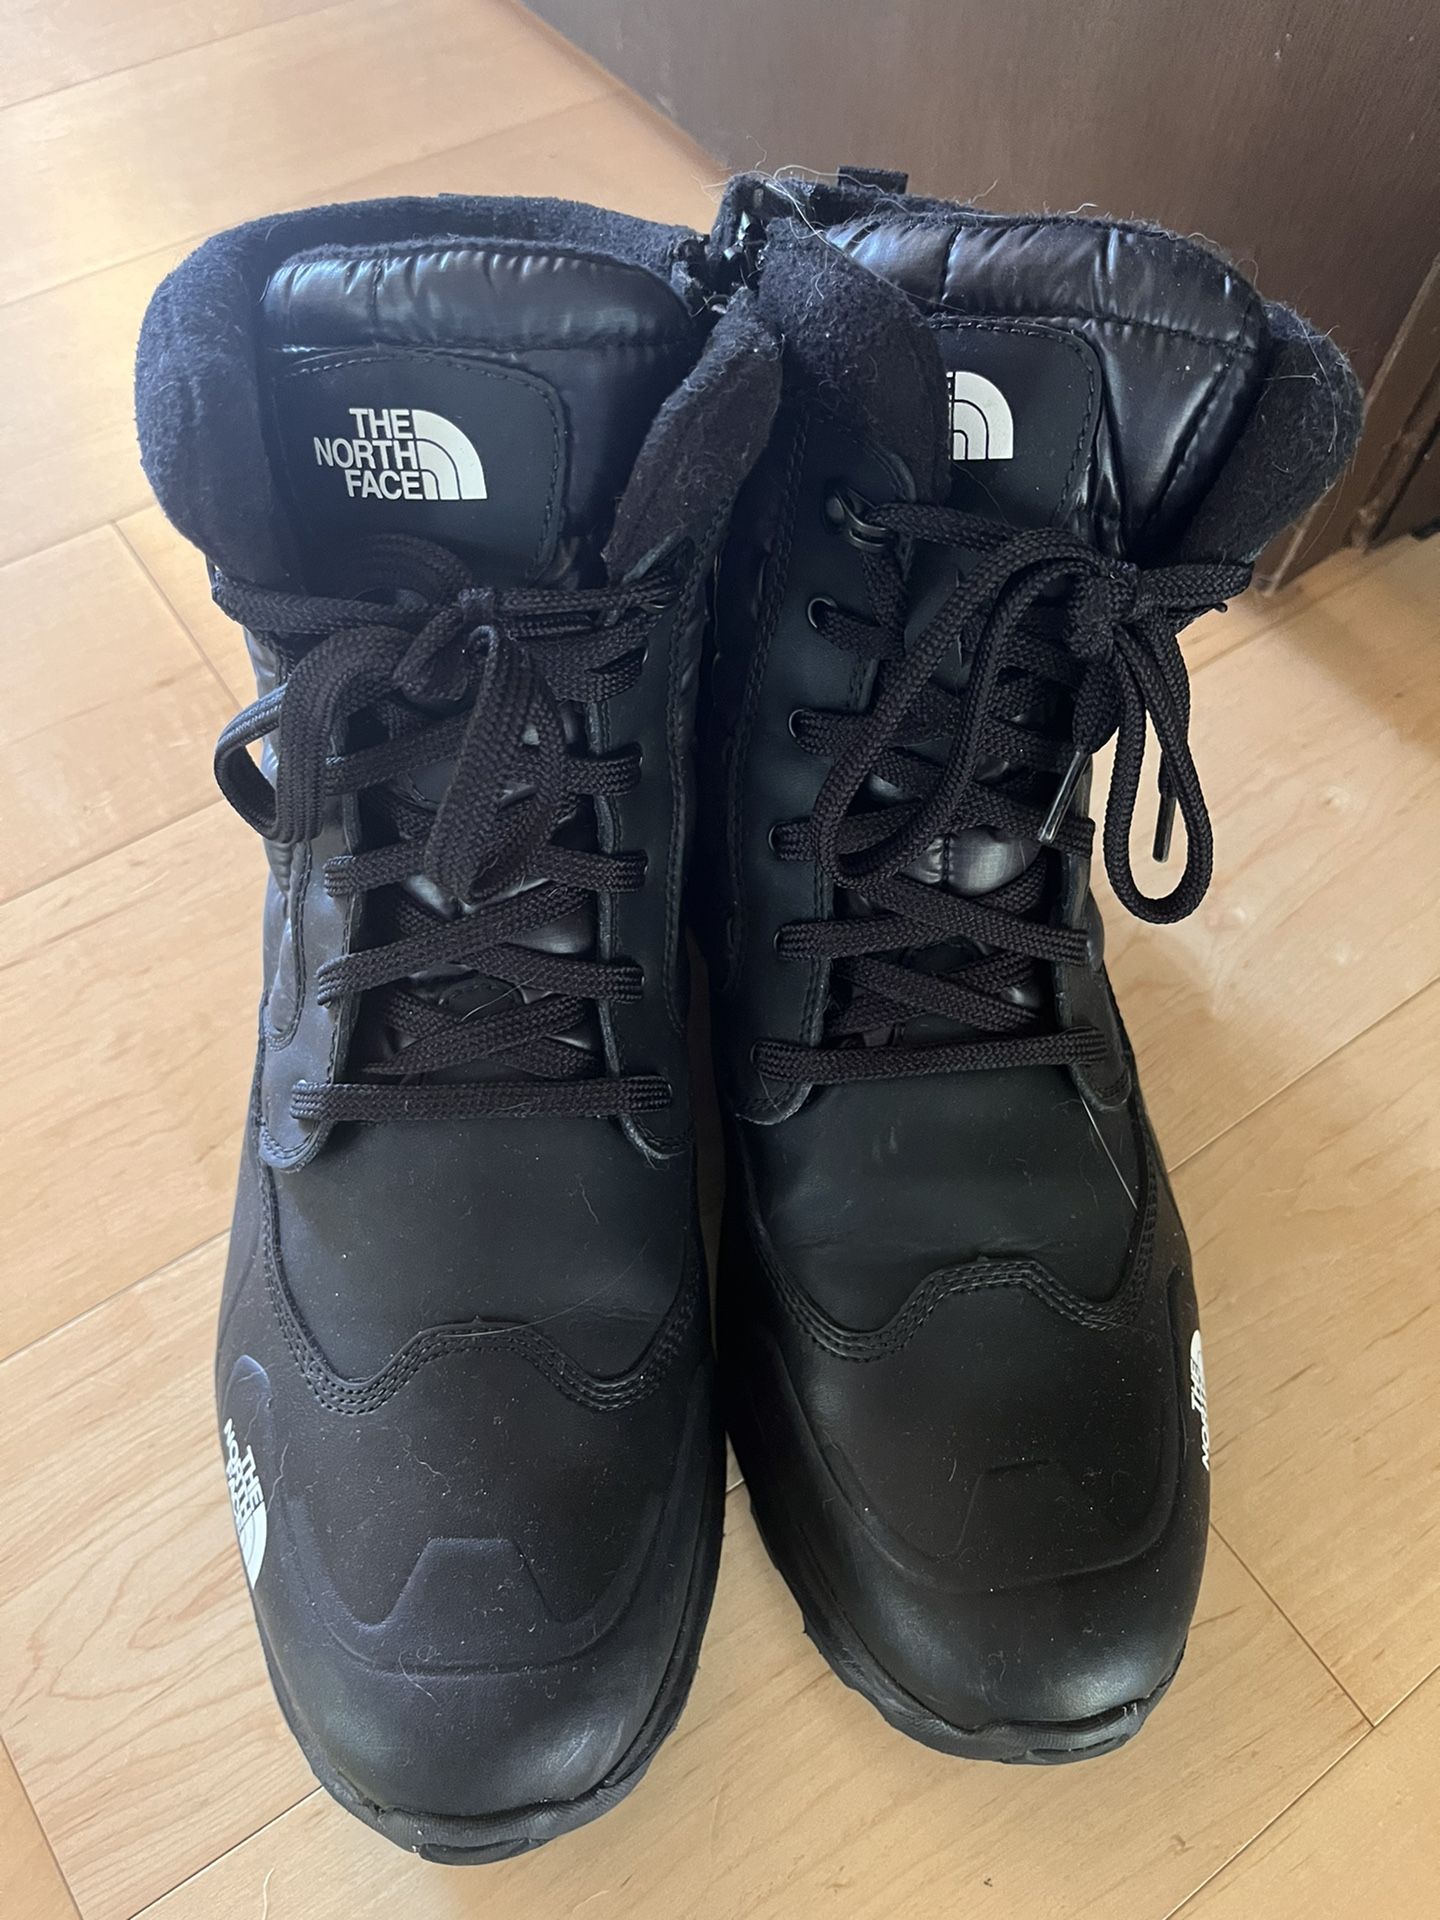 North face Winter Boots